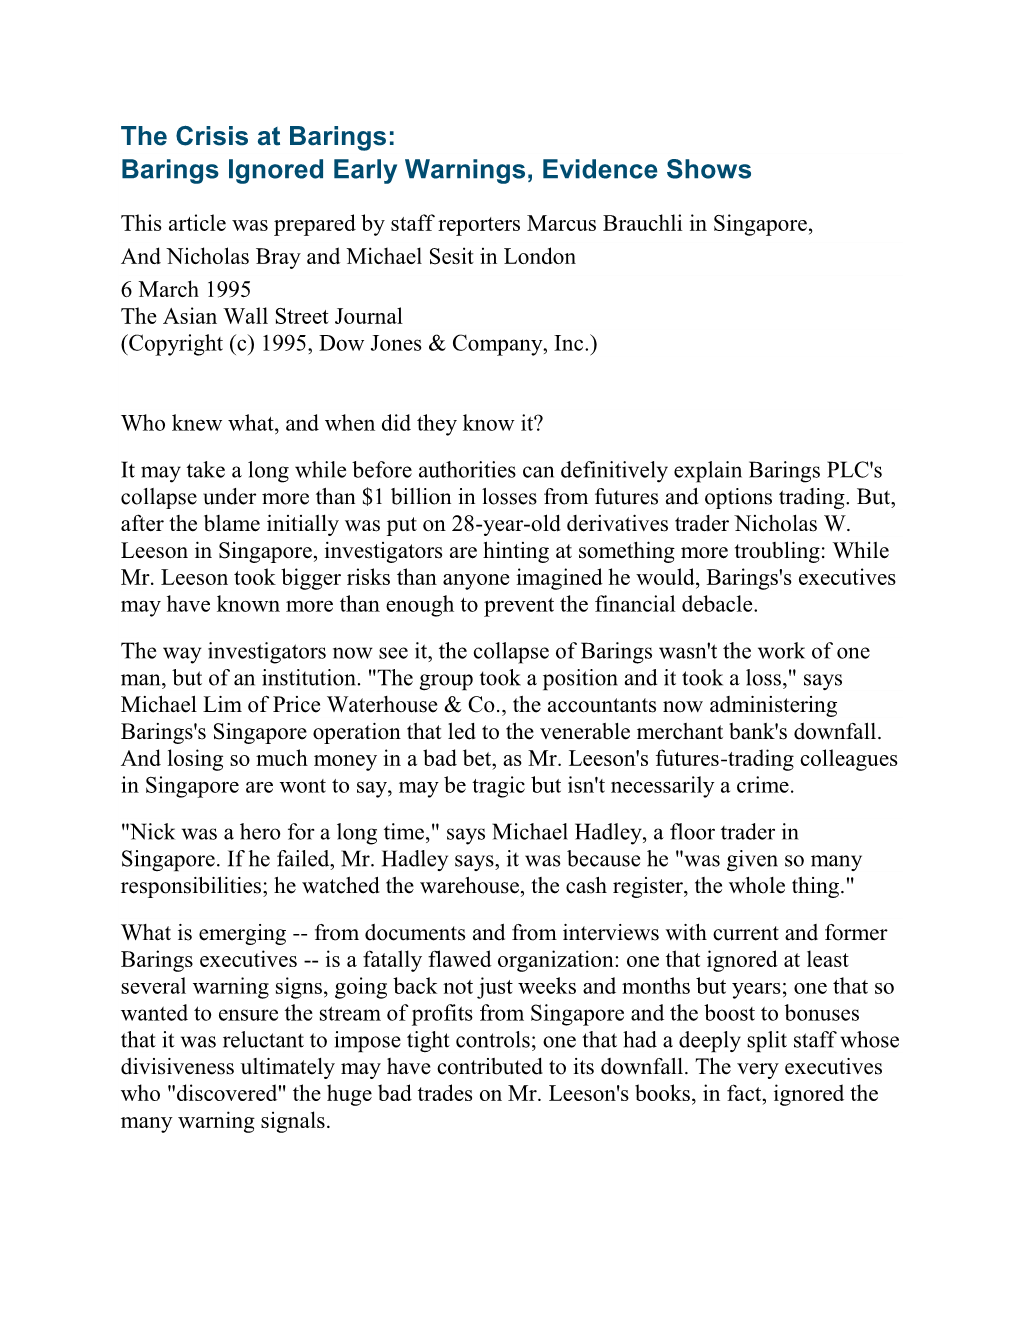 Barings Ignored Early Warnings, Evidence Shows